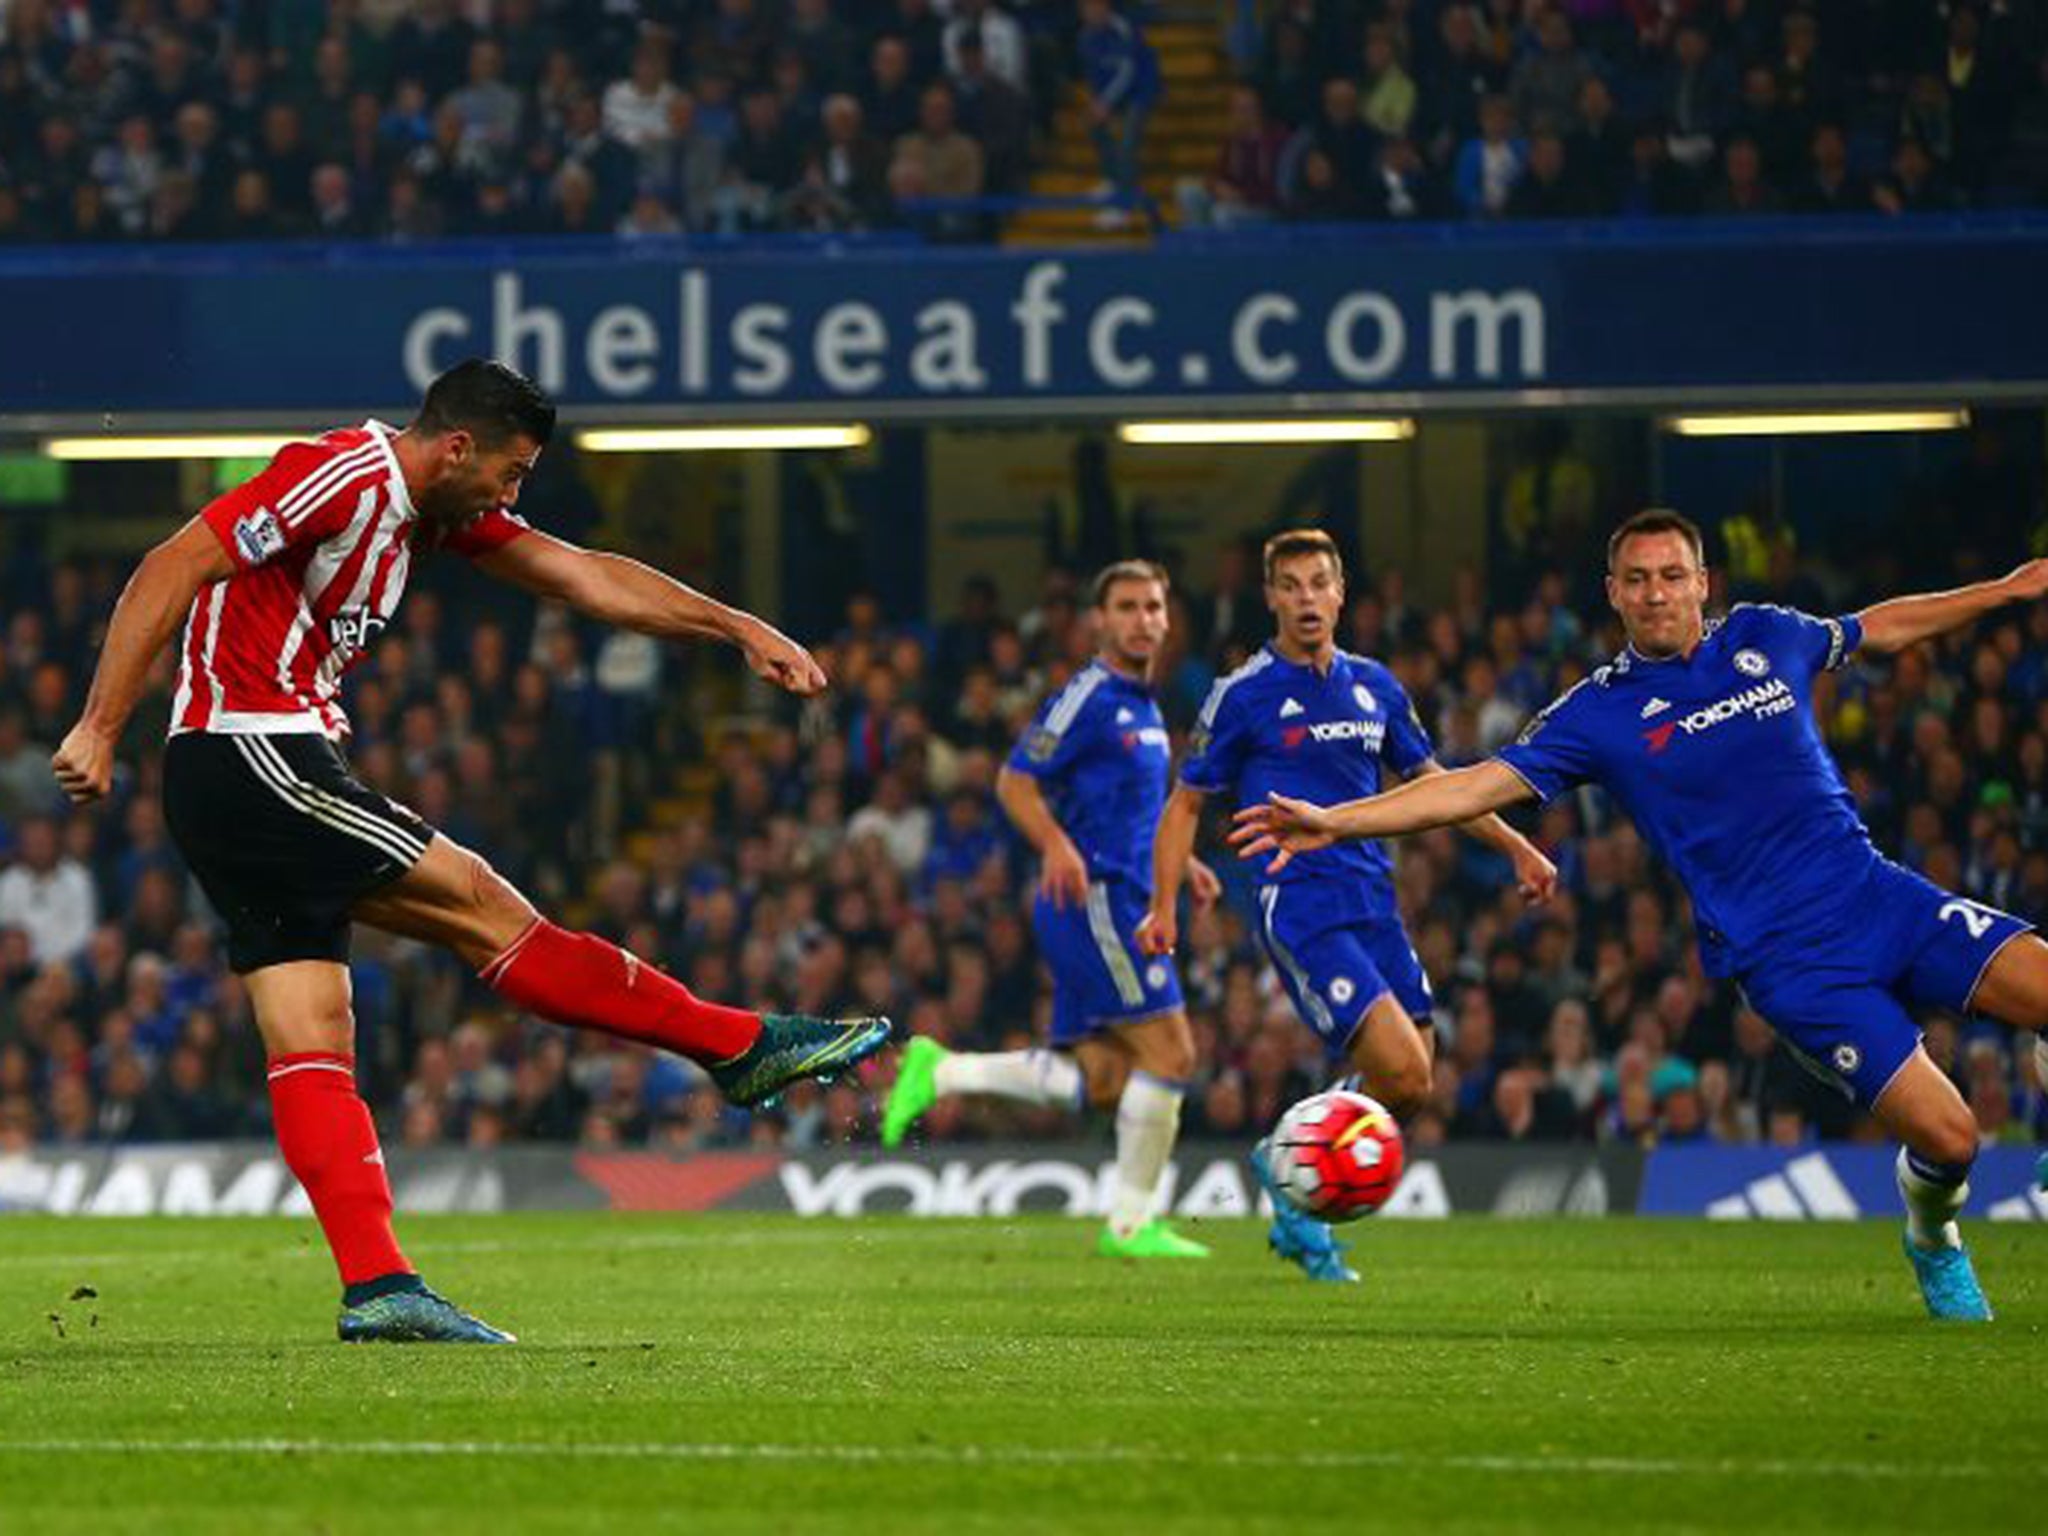 Graziano Pelle fires home the third